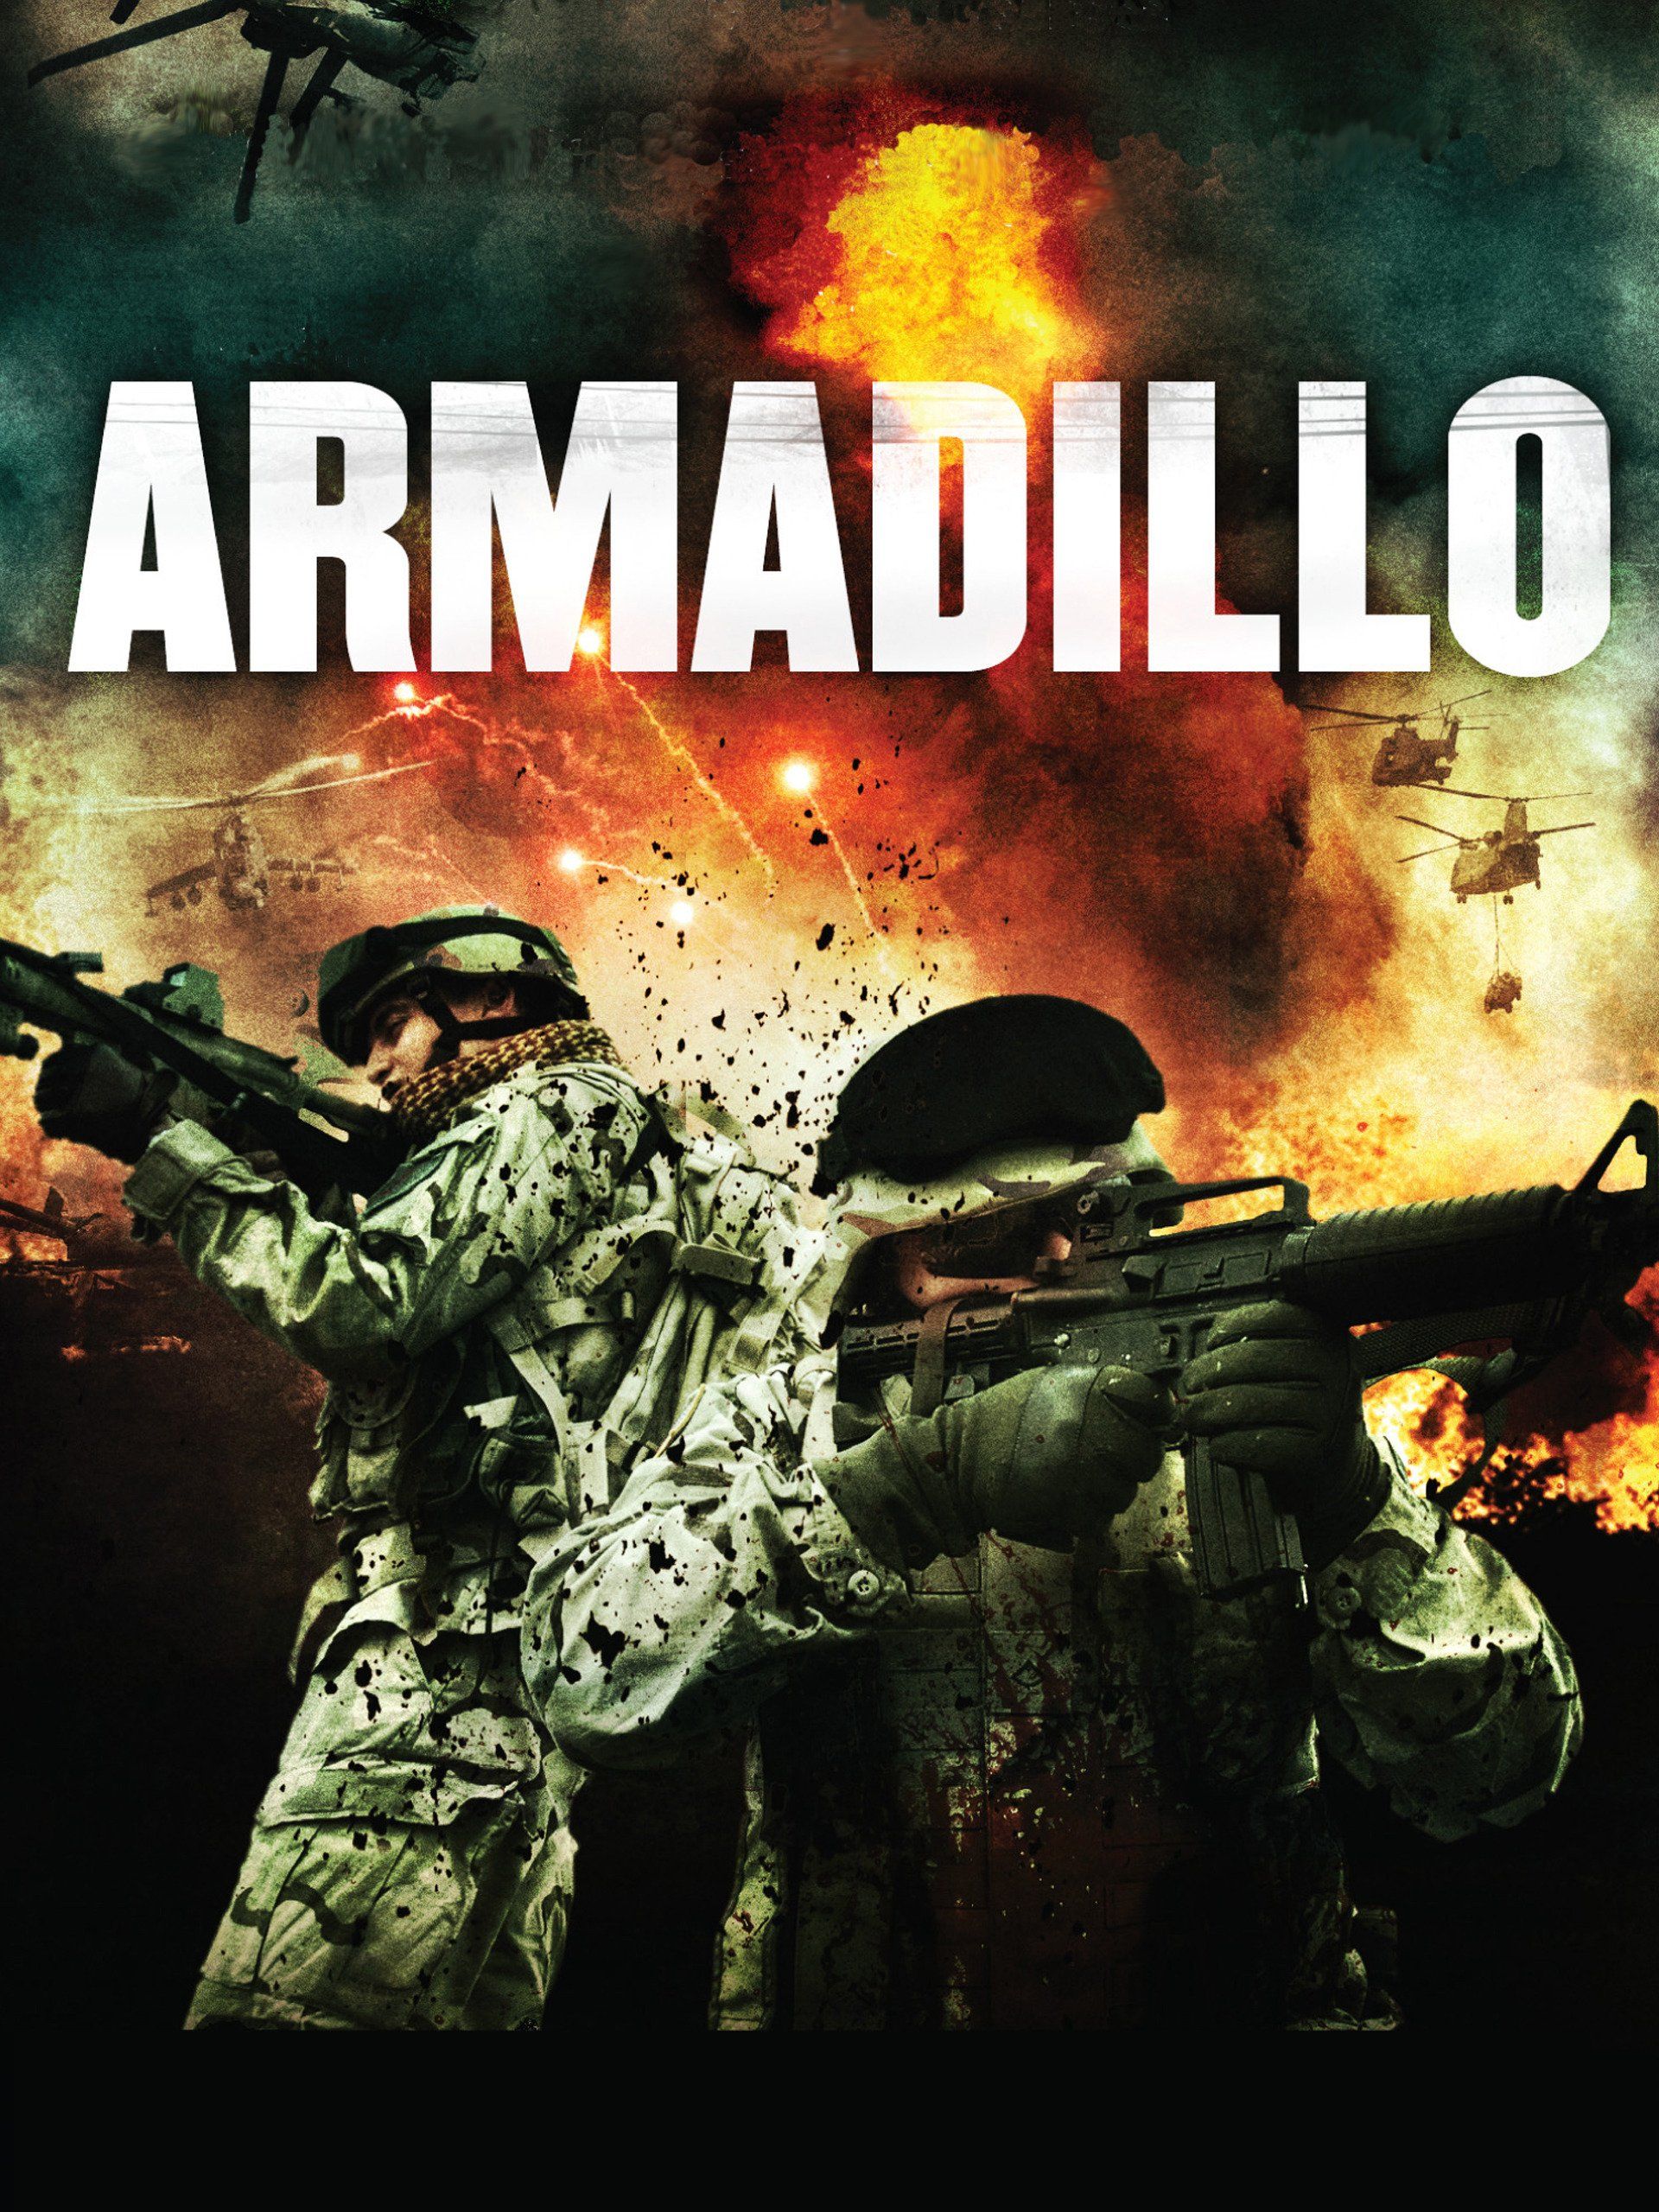 Movies based on the Afghanistan war - Armadillo